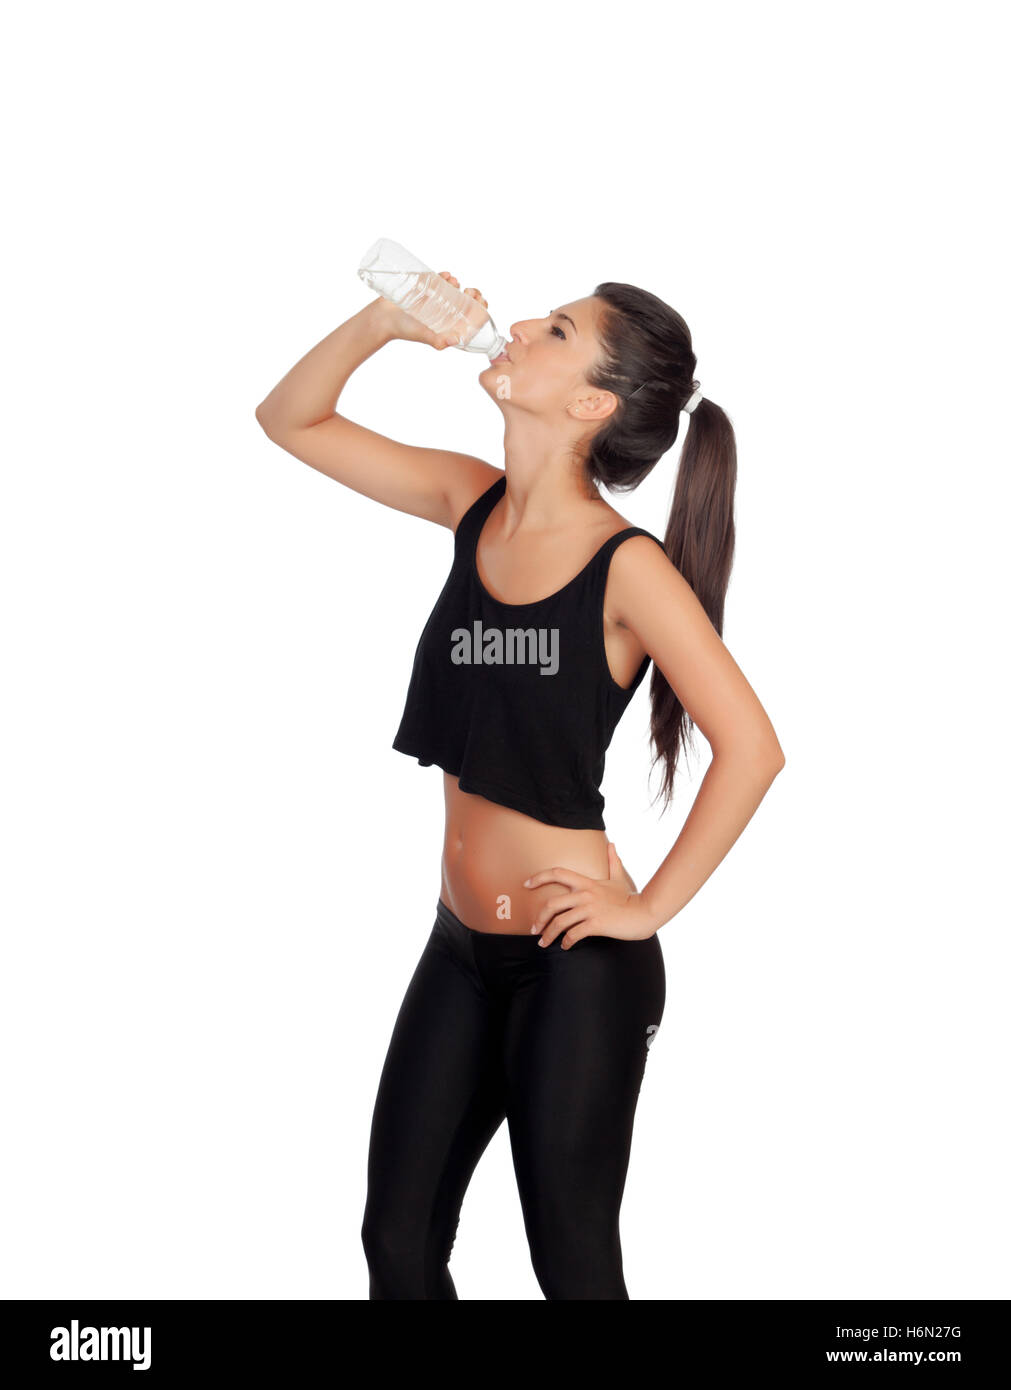 Fitness girl drinking water isolated on a white background Stock Photo